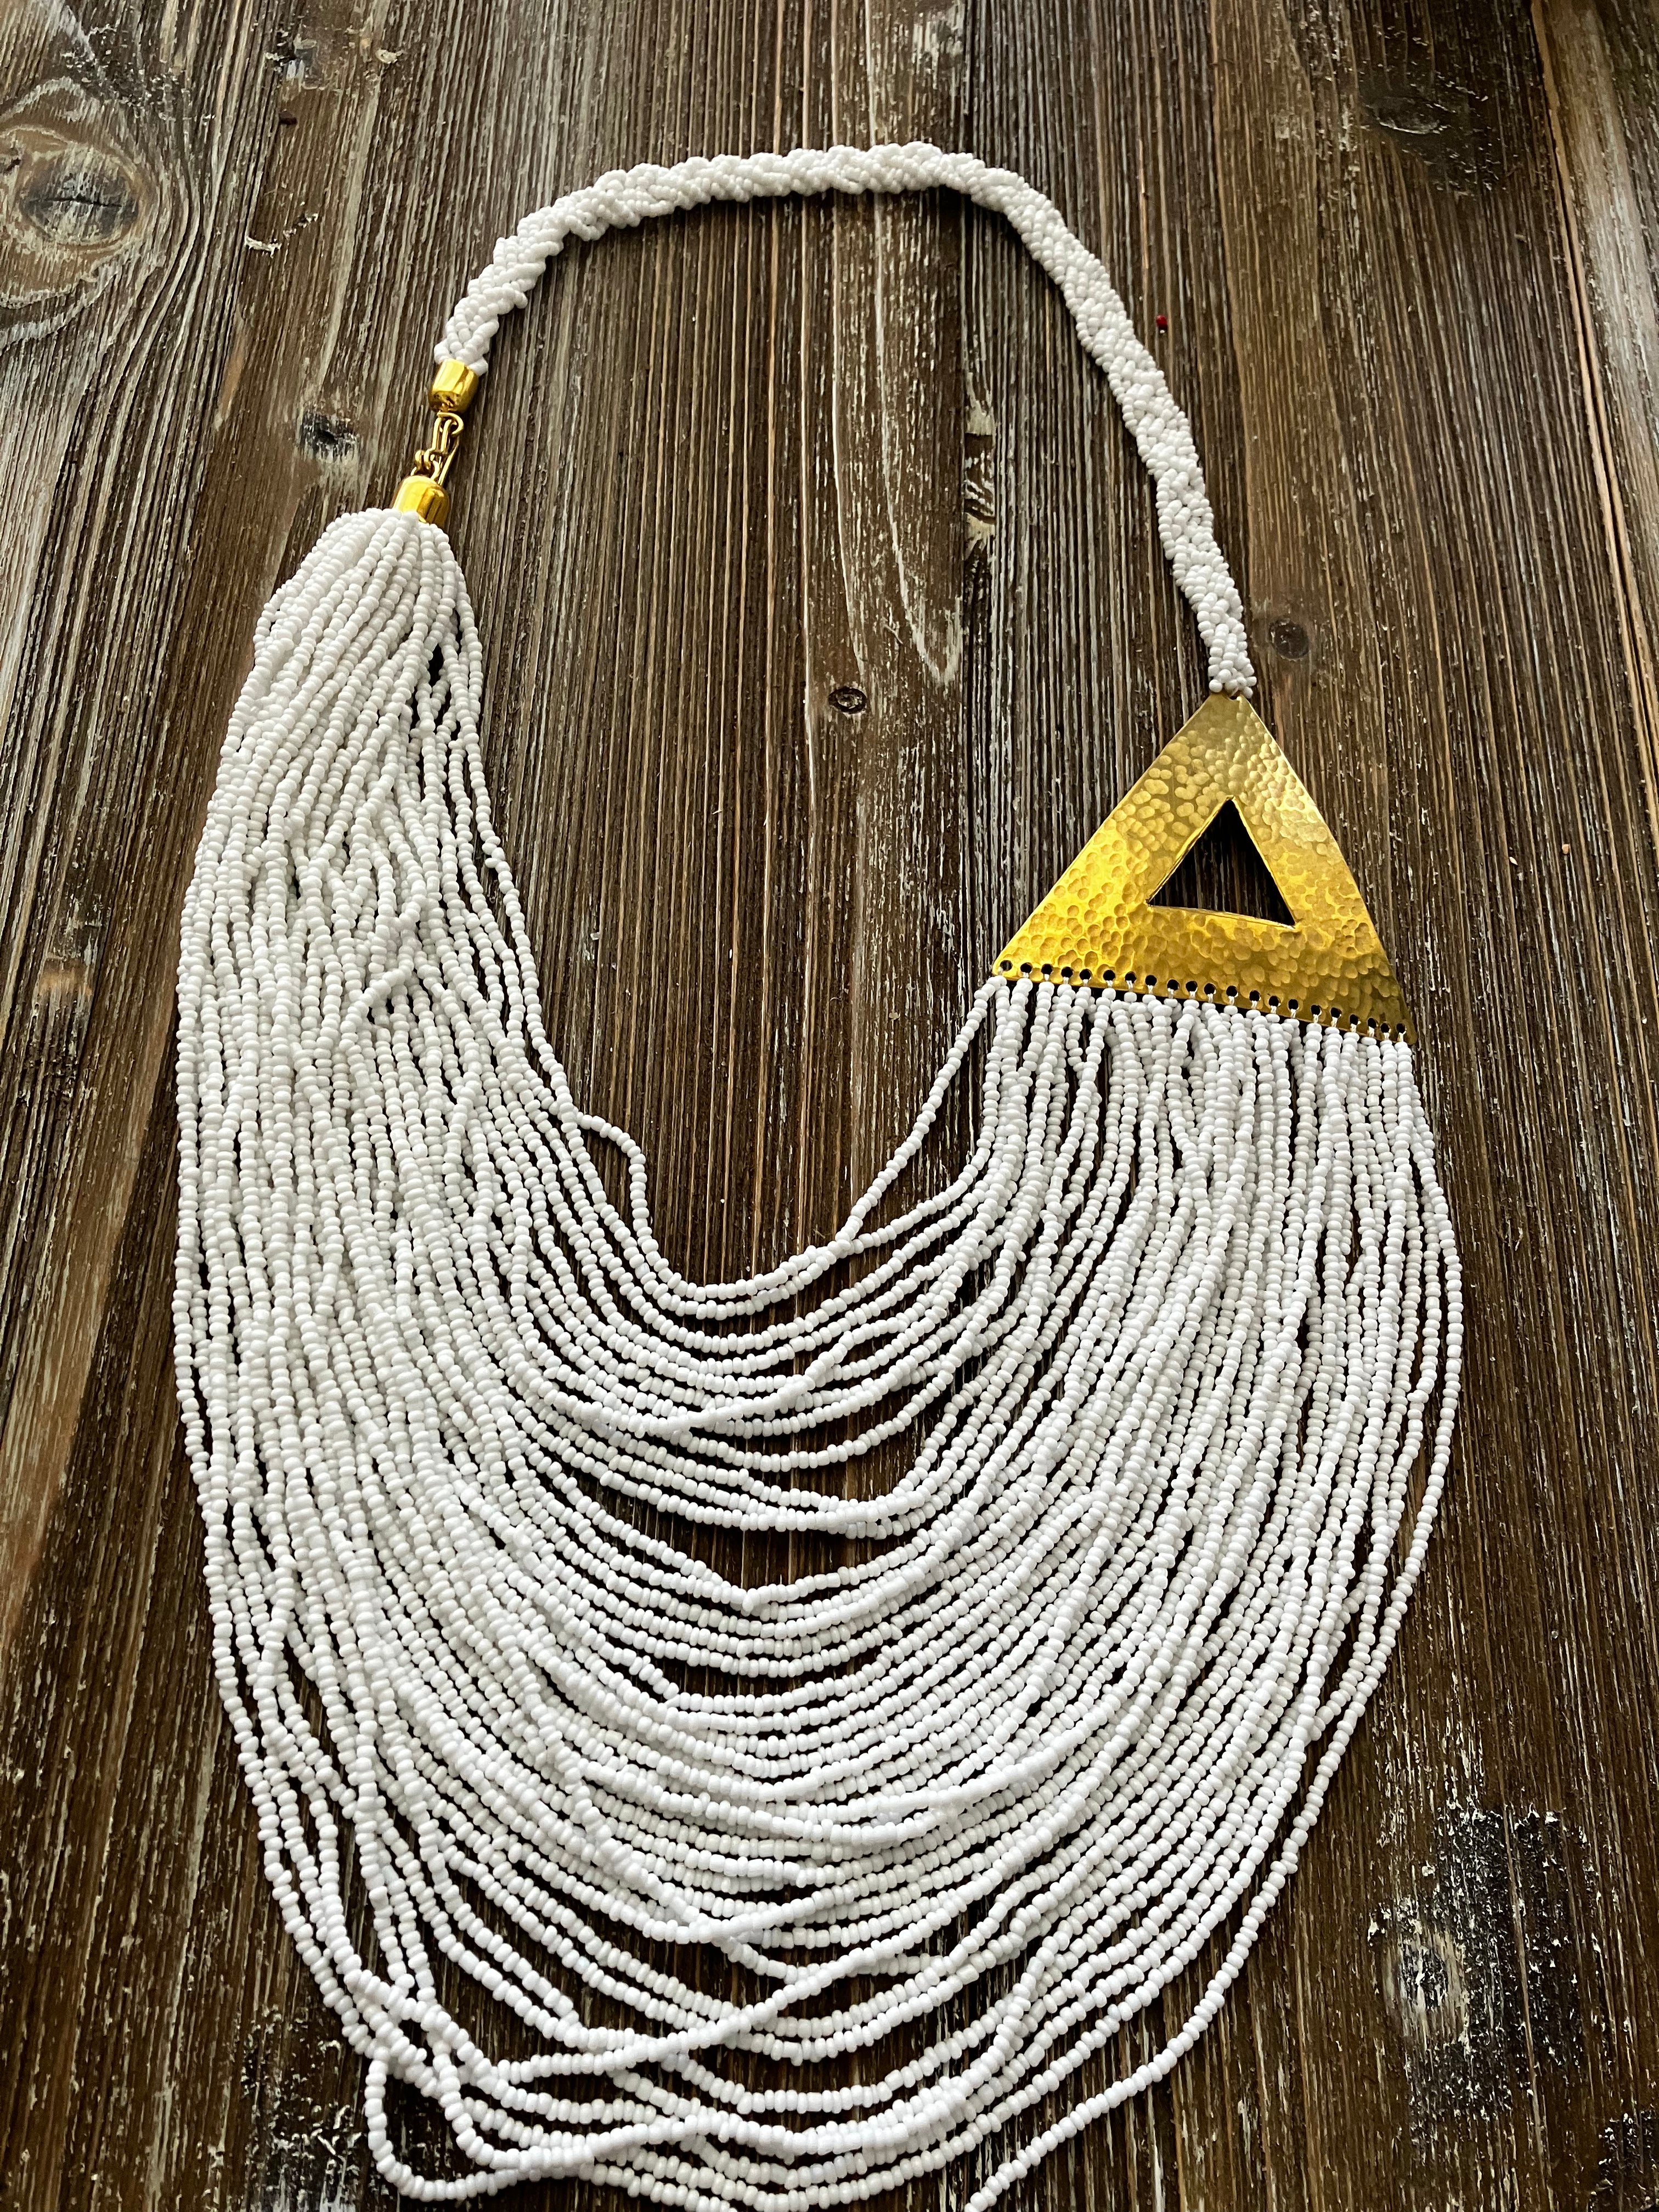 Red and White Beaded Necklace with Pyramid